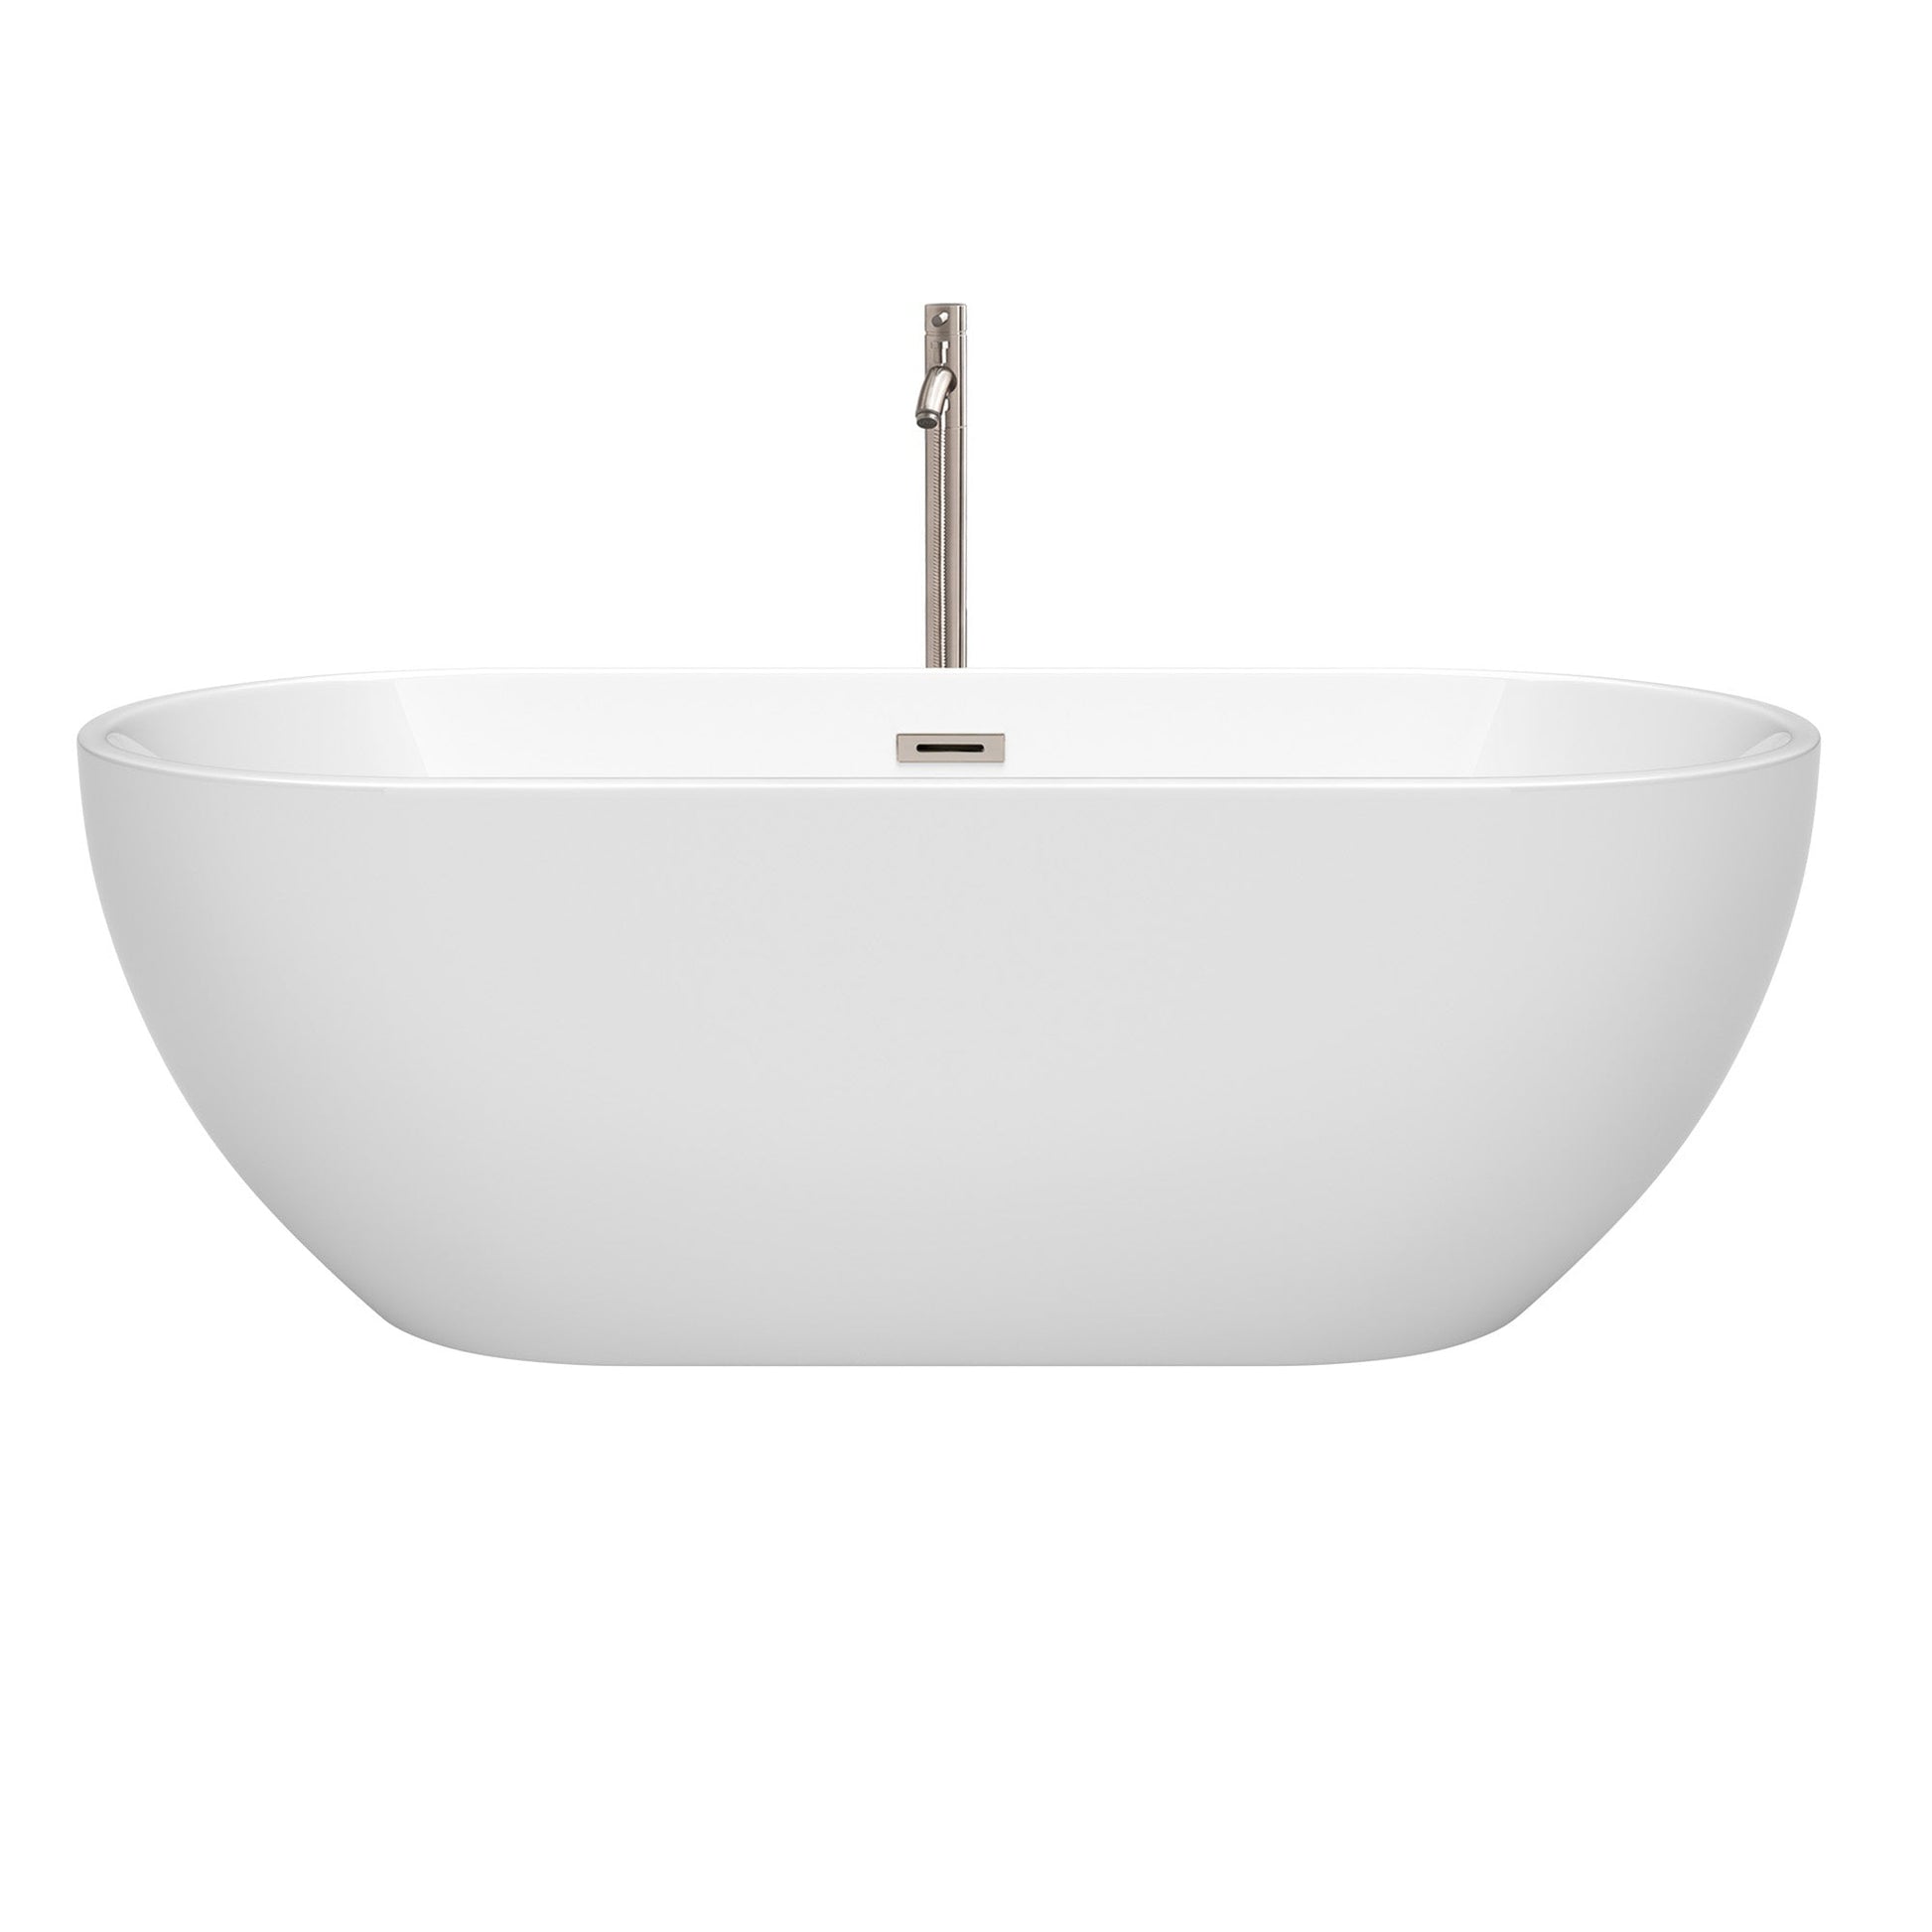 Wyndham Collection Brooklyn 67" Freestanding Bathtub in White With Floor Mounted Faucet, Drain and Overflow Trim in Brushed Nickel